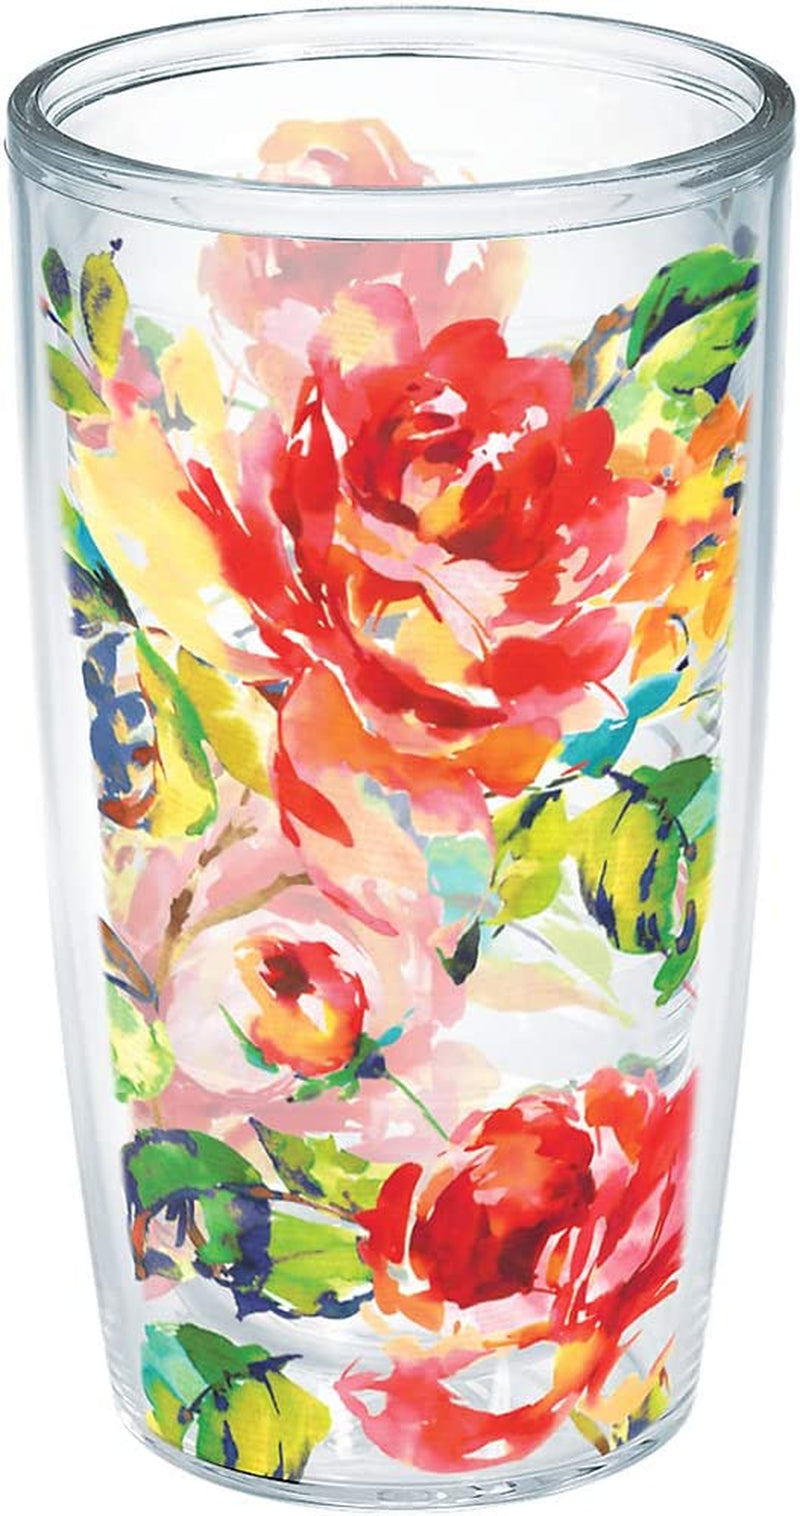 Tervis Triple Walled Fiesta Insulated Tumbler Cup Keeps Drinks Cold & Hot, 20Oz - Stainless Steel, Floral Bouquet